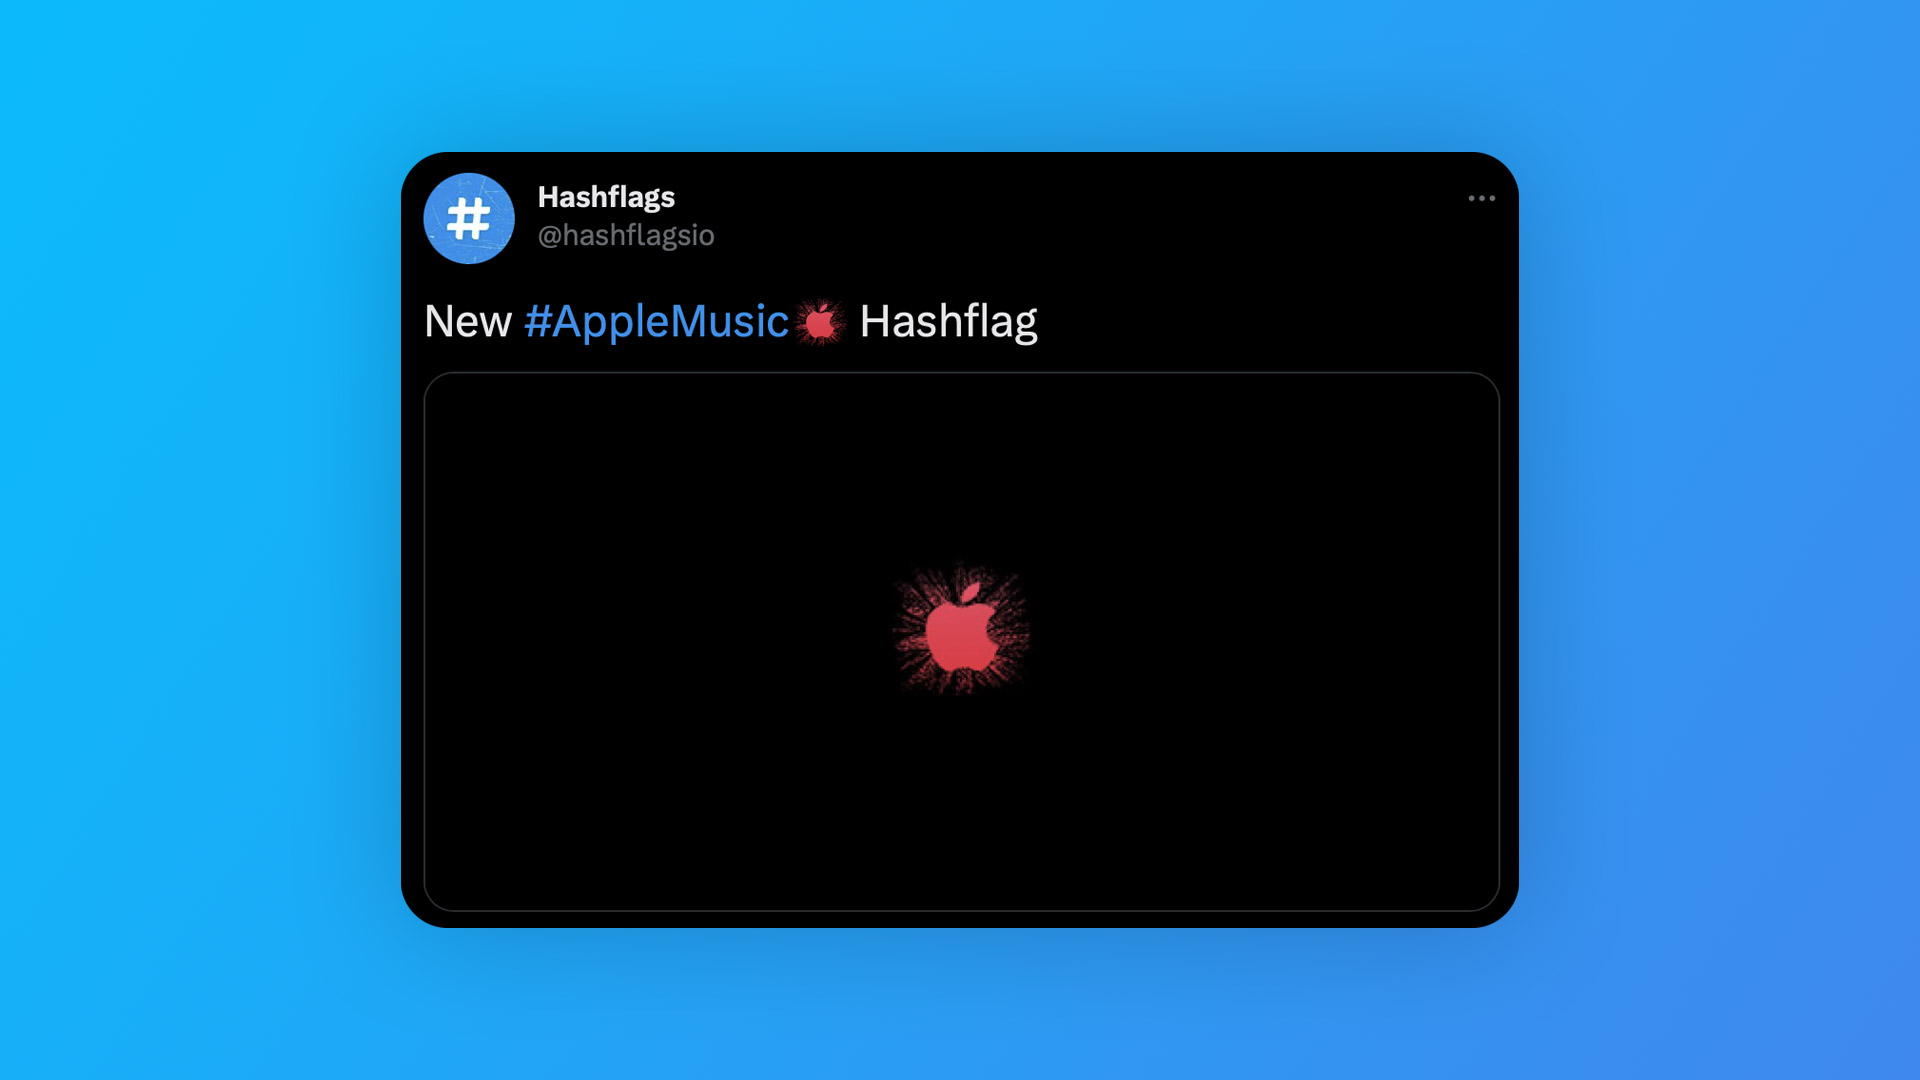 Twitter rolling out #AppleMusic hashflag ahead of Super Bowl